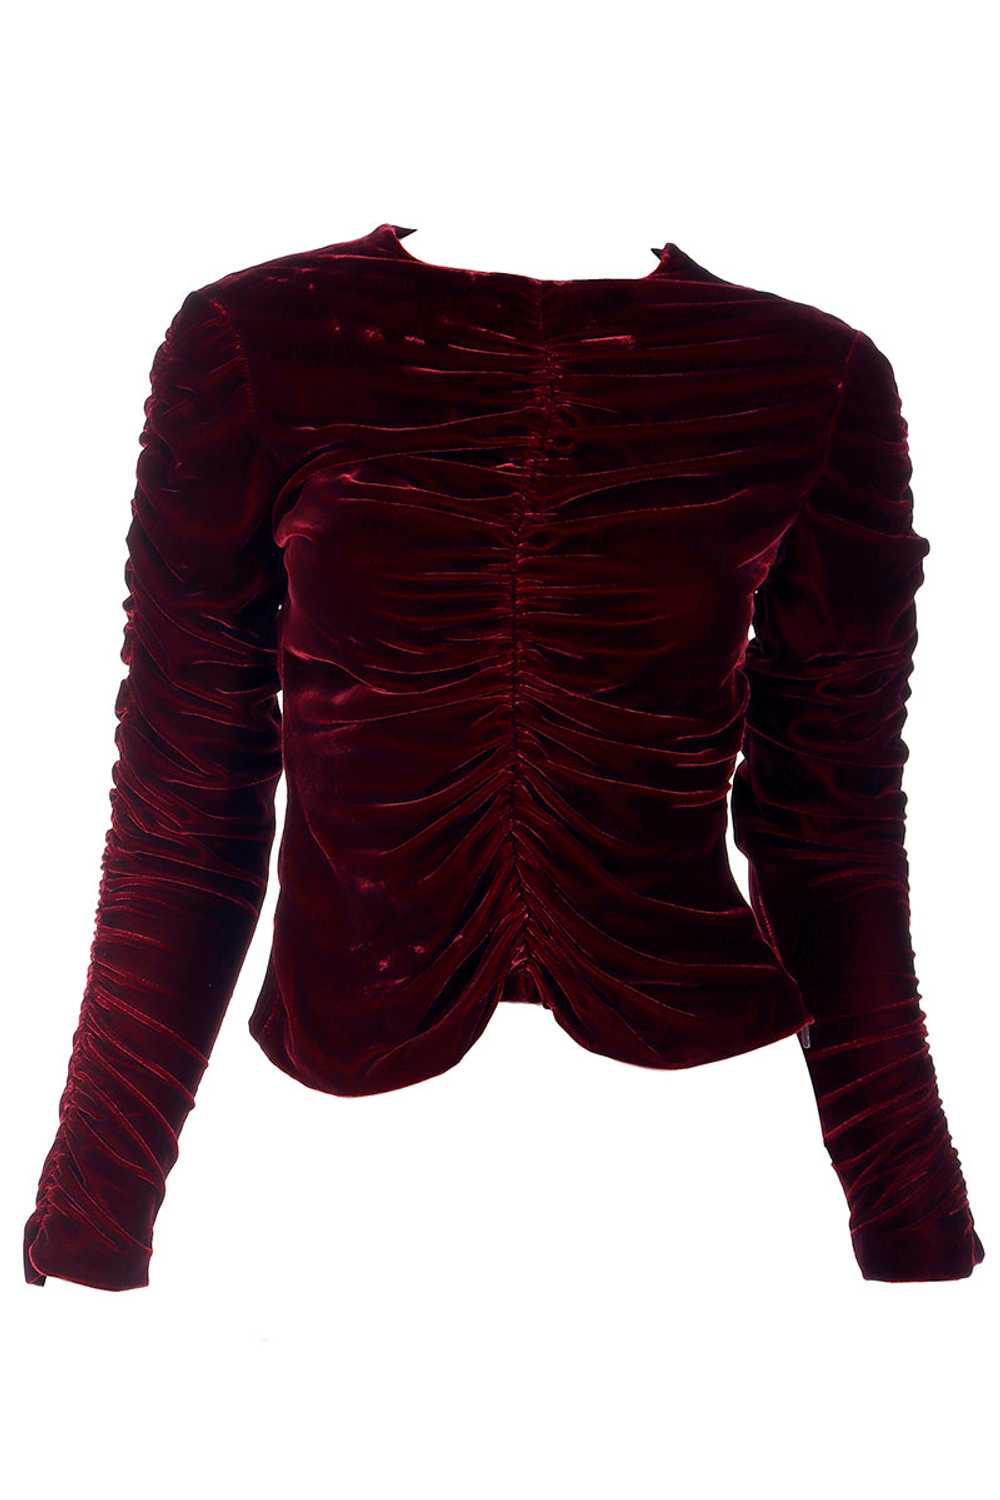 F/W 1999 Tom Ford For Gucci Deep Red Velvet Ruche… - image 1